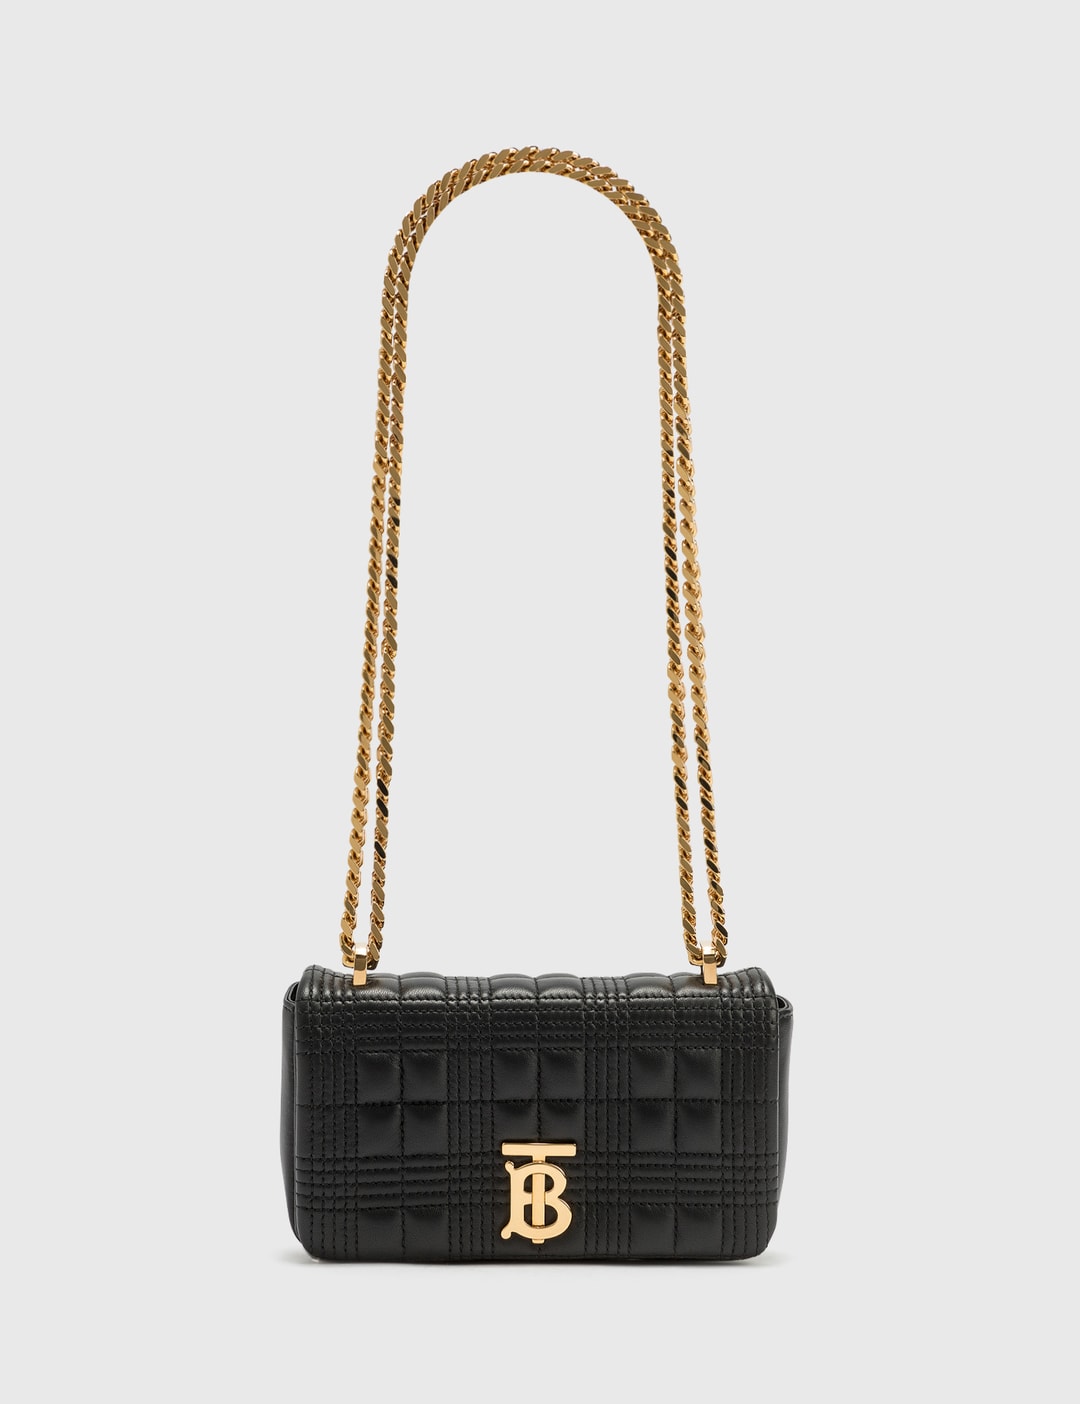 Burberry Quilted Leather Small Lola Bucket Bag Black/Gold-tone